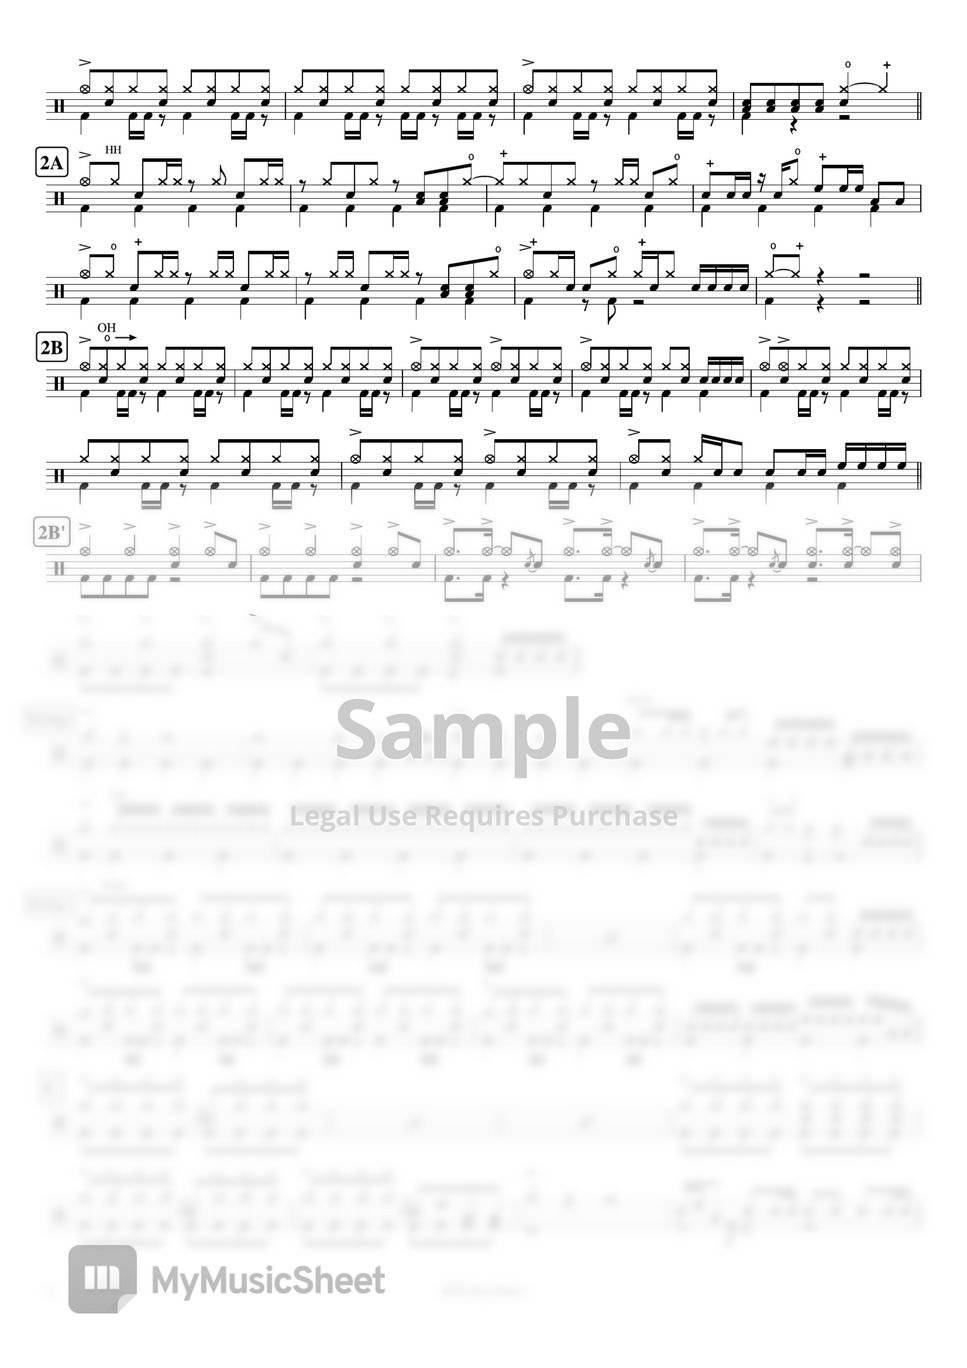 THE ORAL CIGARETTES - Kyouran Hey Kids!! (Anime''Noragami ARAGOTO''OP) by Cookai's J-pop Drum sheet music!!!